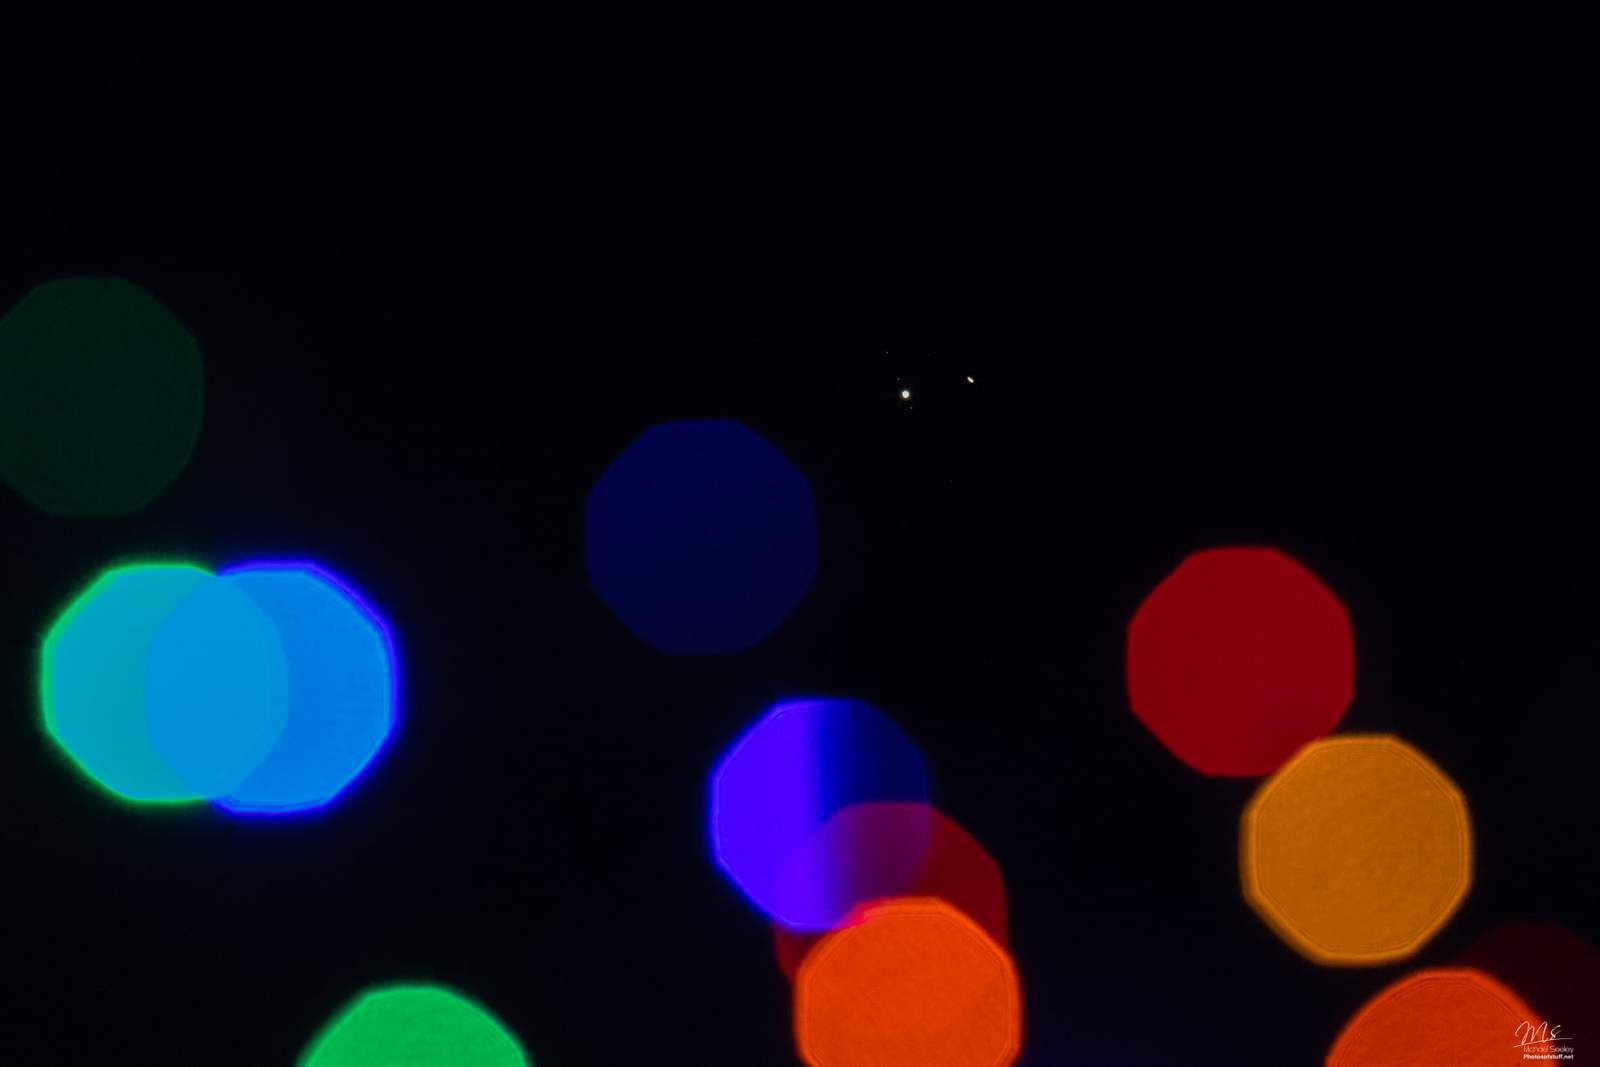 Photos: Jupiter, Saturn conjunction put on a show forming ‘Christmas star’